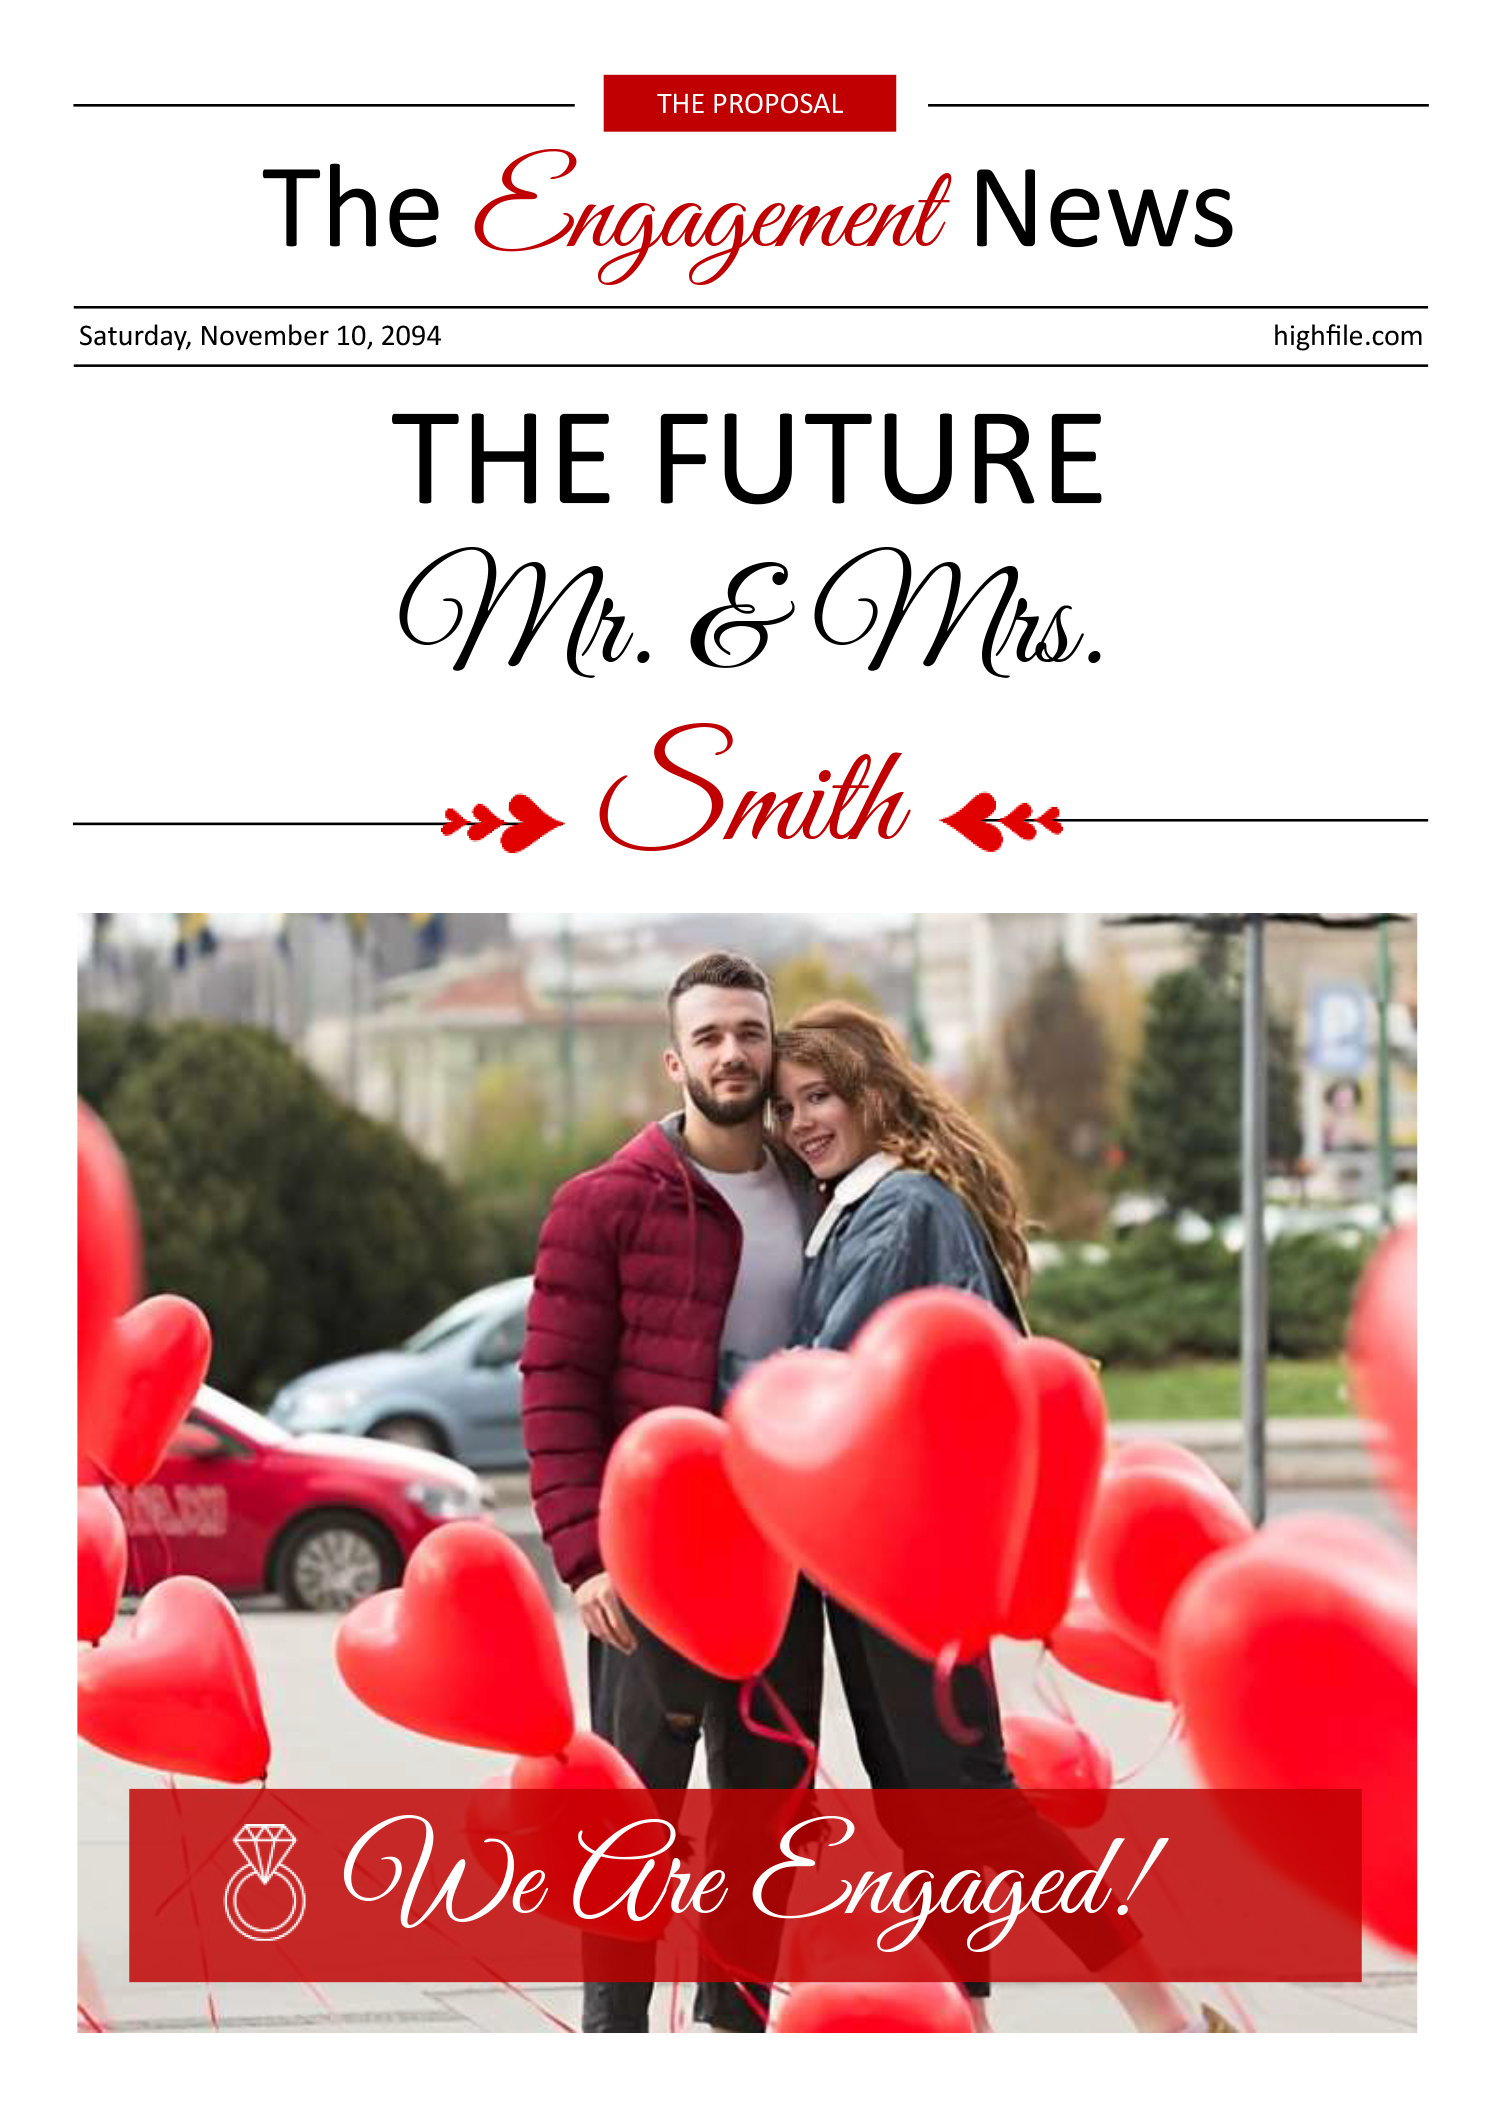 Wedding Engagement Newspaper Template - Front Page